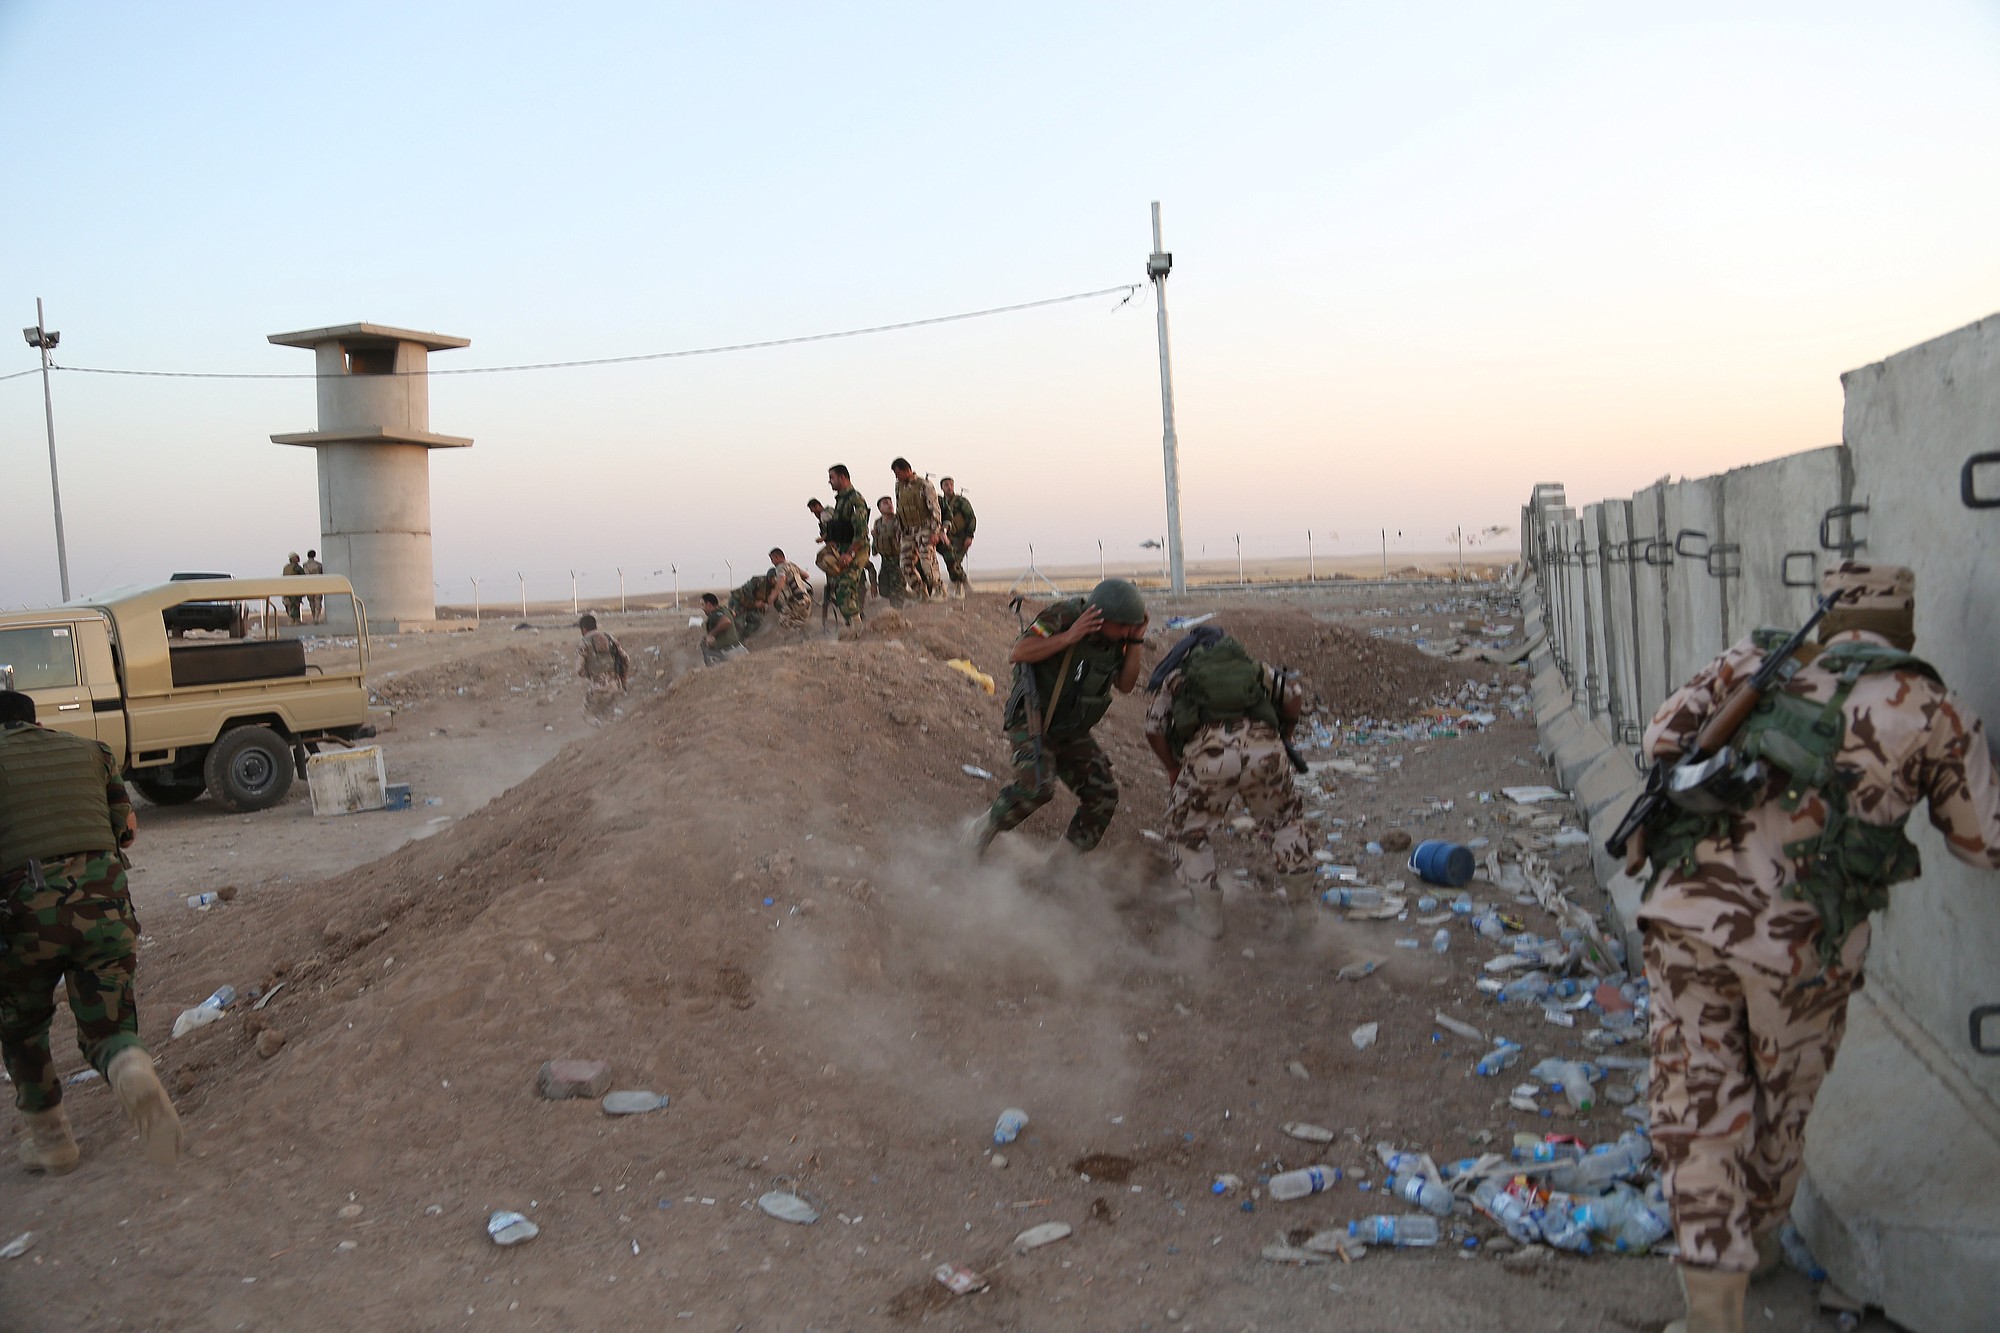 Kurdish Peshmerga fighters take cover Friday during airstrikes targeting Islamic State militants near the Khazer checkpoint outside of the city of Irbil in northern Iraq. Iraqi Air Force has been carrying out strikes against the militants, and for the first time on Friday, U.S.